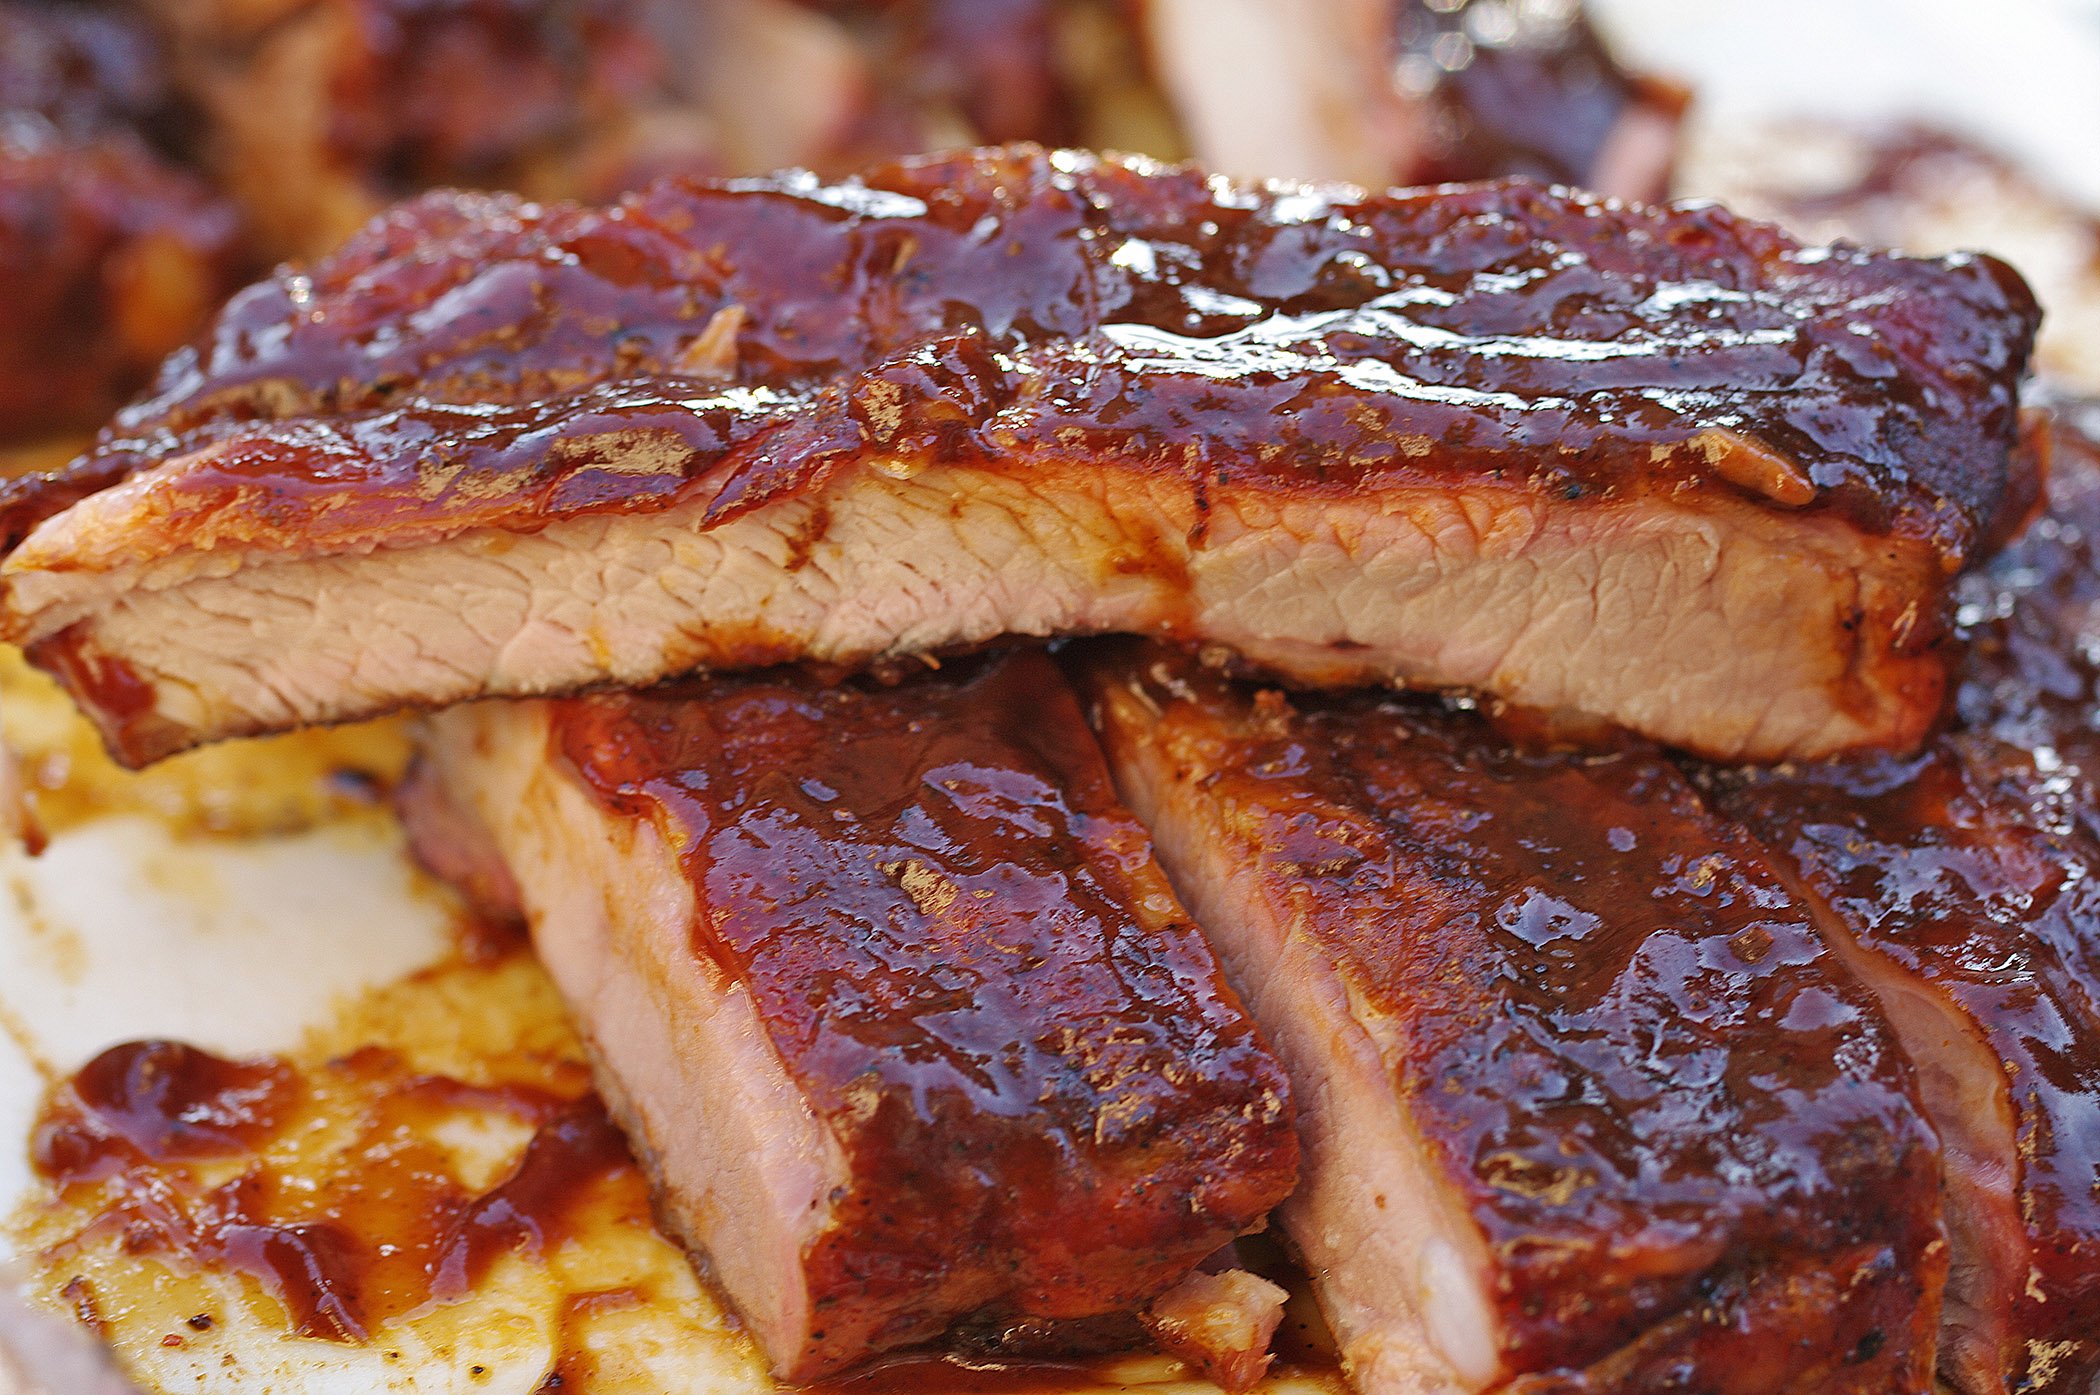 BBQ pork ribs covered in BBQ sauce ready to be enjoyed!